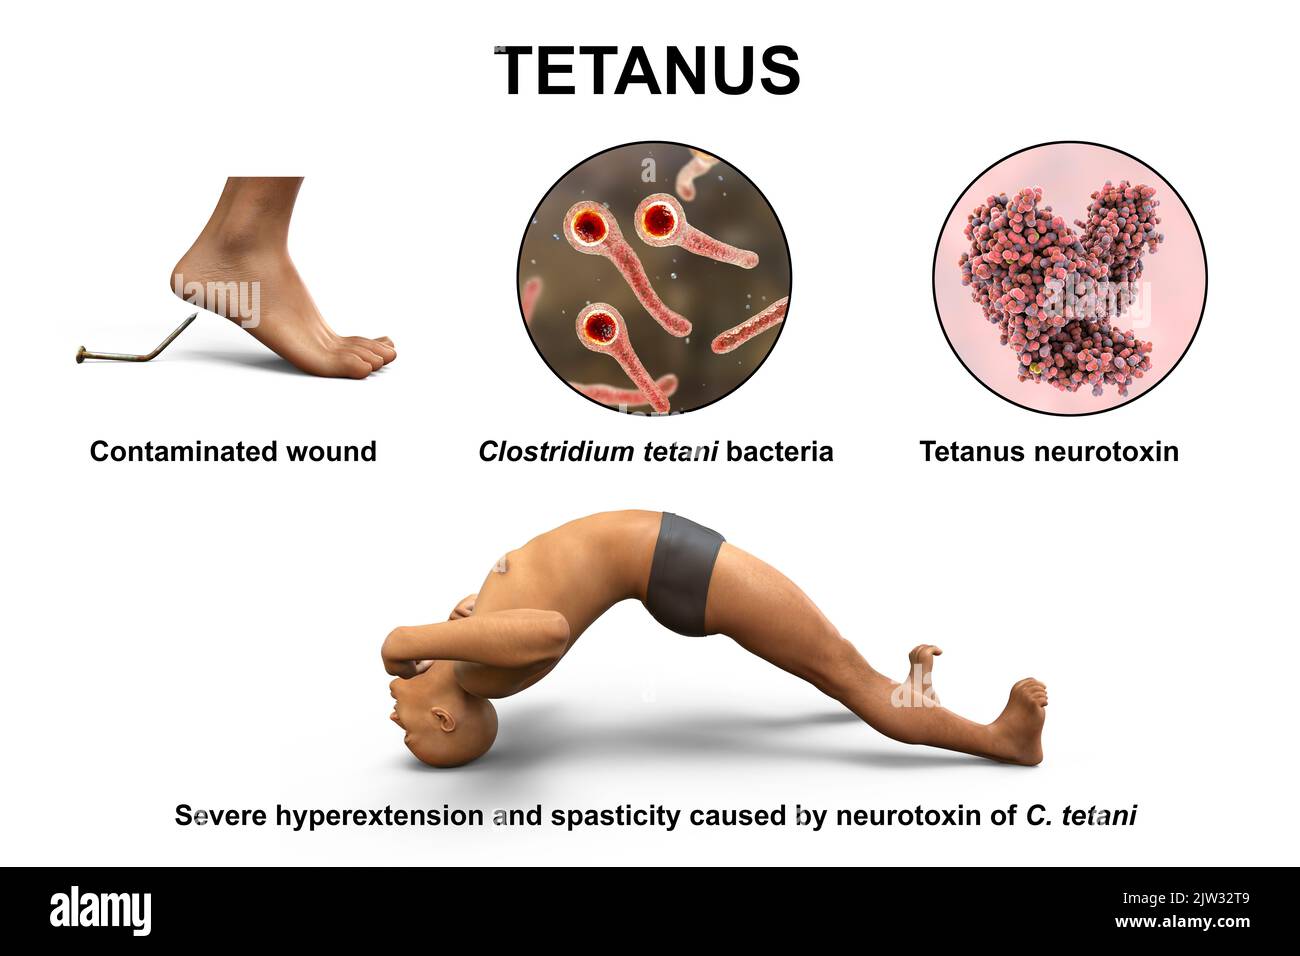 Mechanism of tetanus disease, illustration. A skin wound is contaminated with Clostridium tetani bacteria that produce a neurotoxin that reaches the spinal cord and causes spastic paralysis. The man is in opisthotonus (backward spasm), a state of severe hyperextension and spasticity. Stock Photo